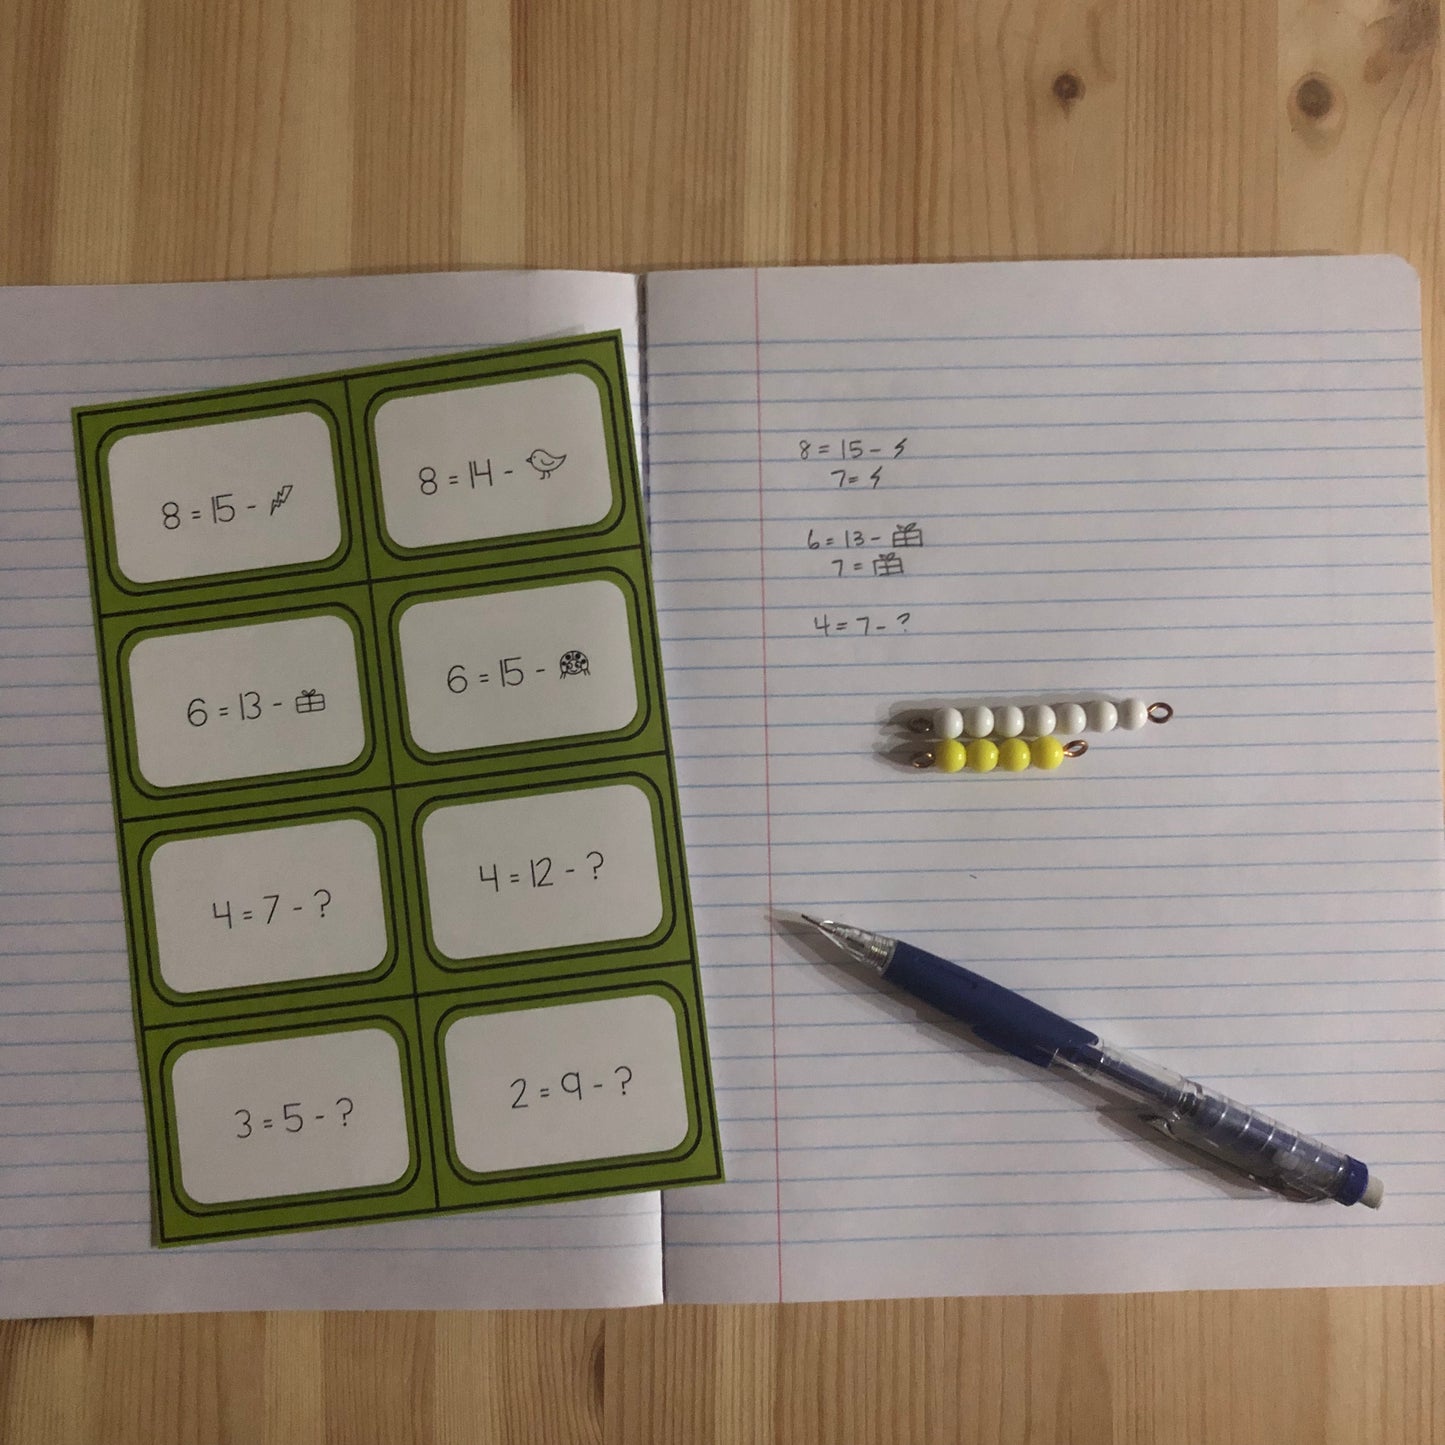 Alternative formats for Subtraction - basic facts - montessorikiwi